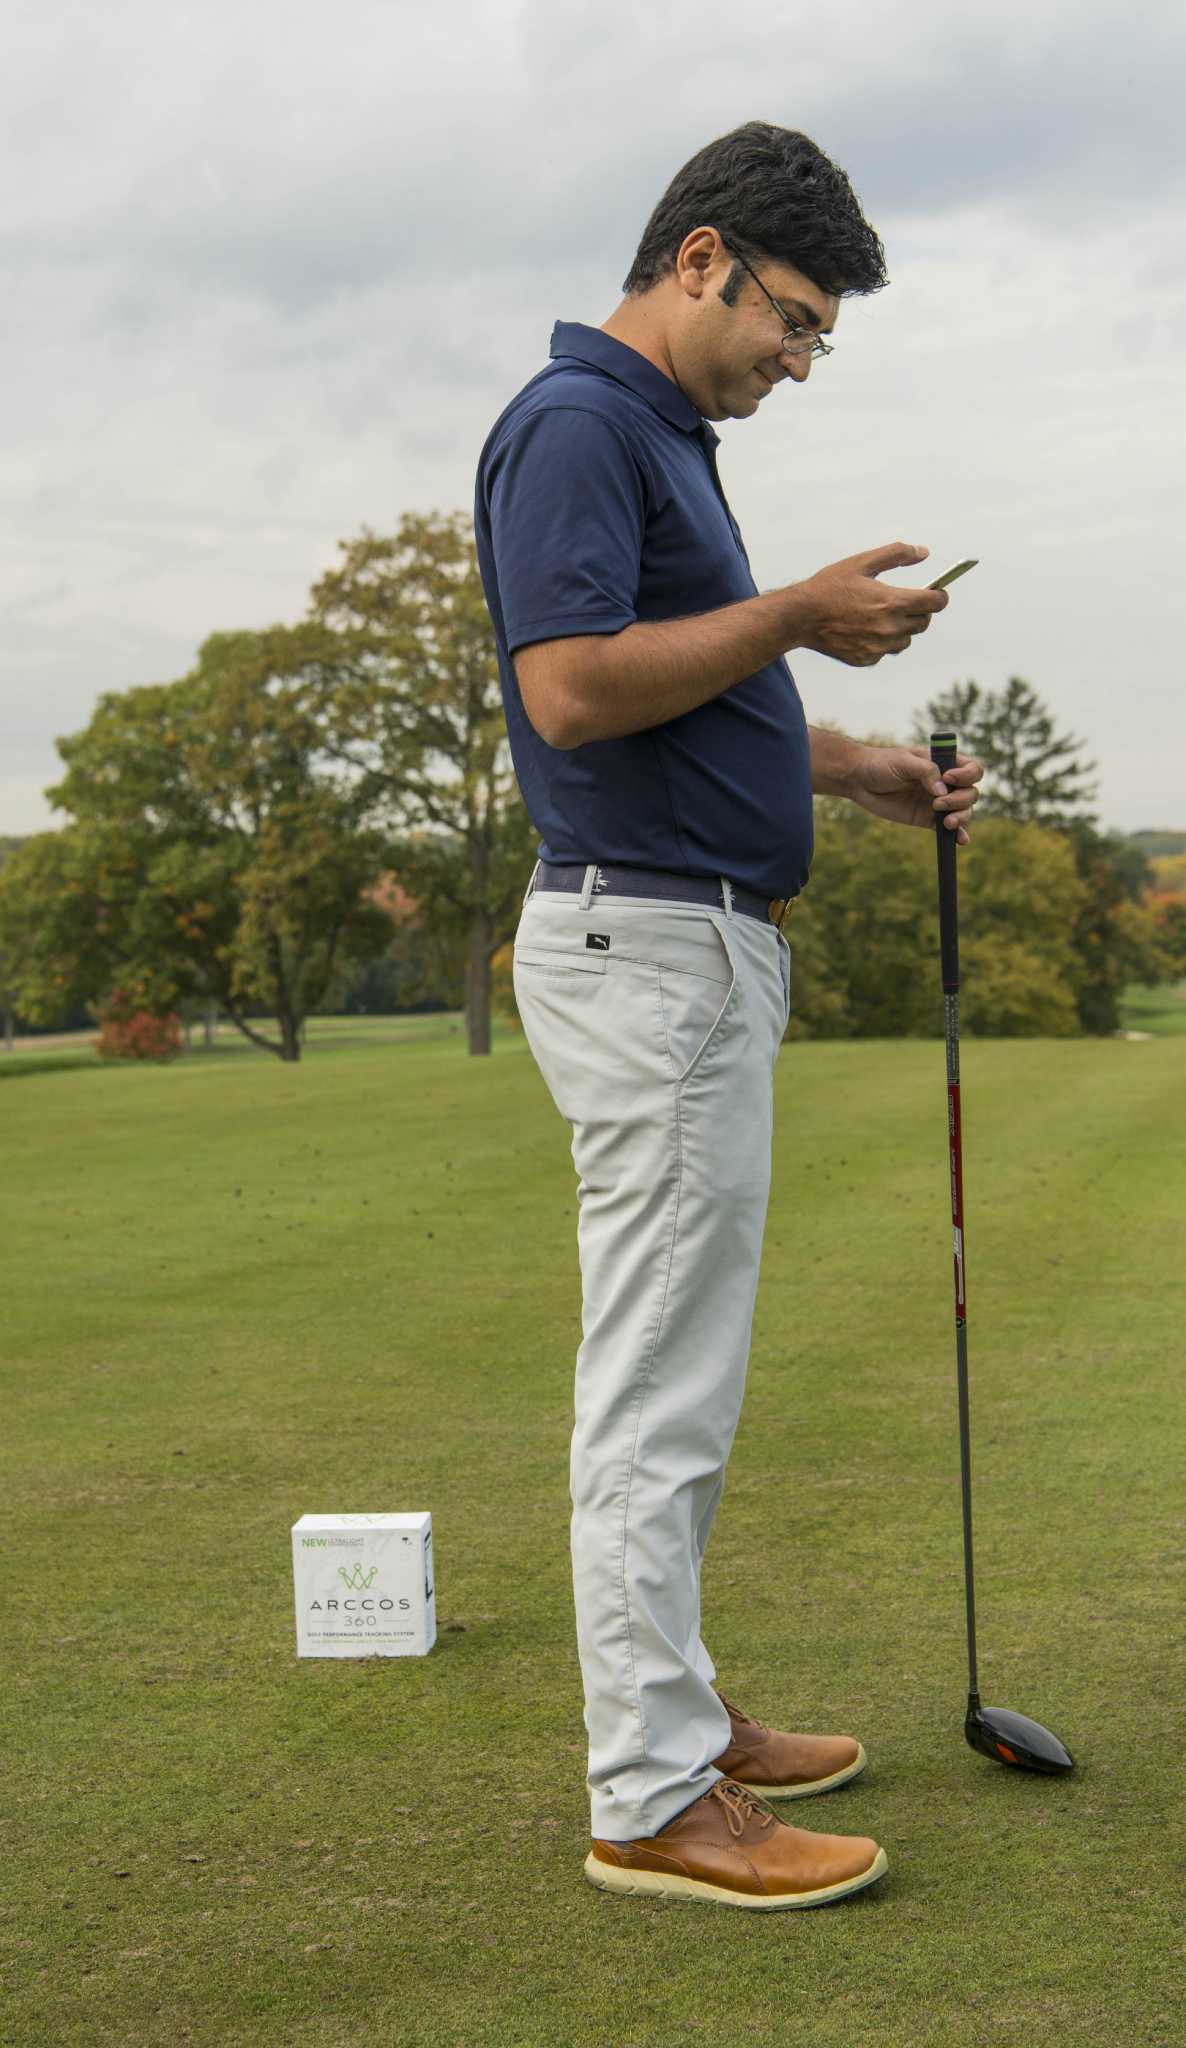 Stamford company's golf technology shows advances - The Advocate